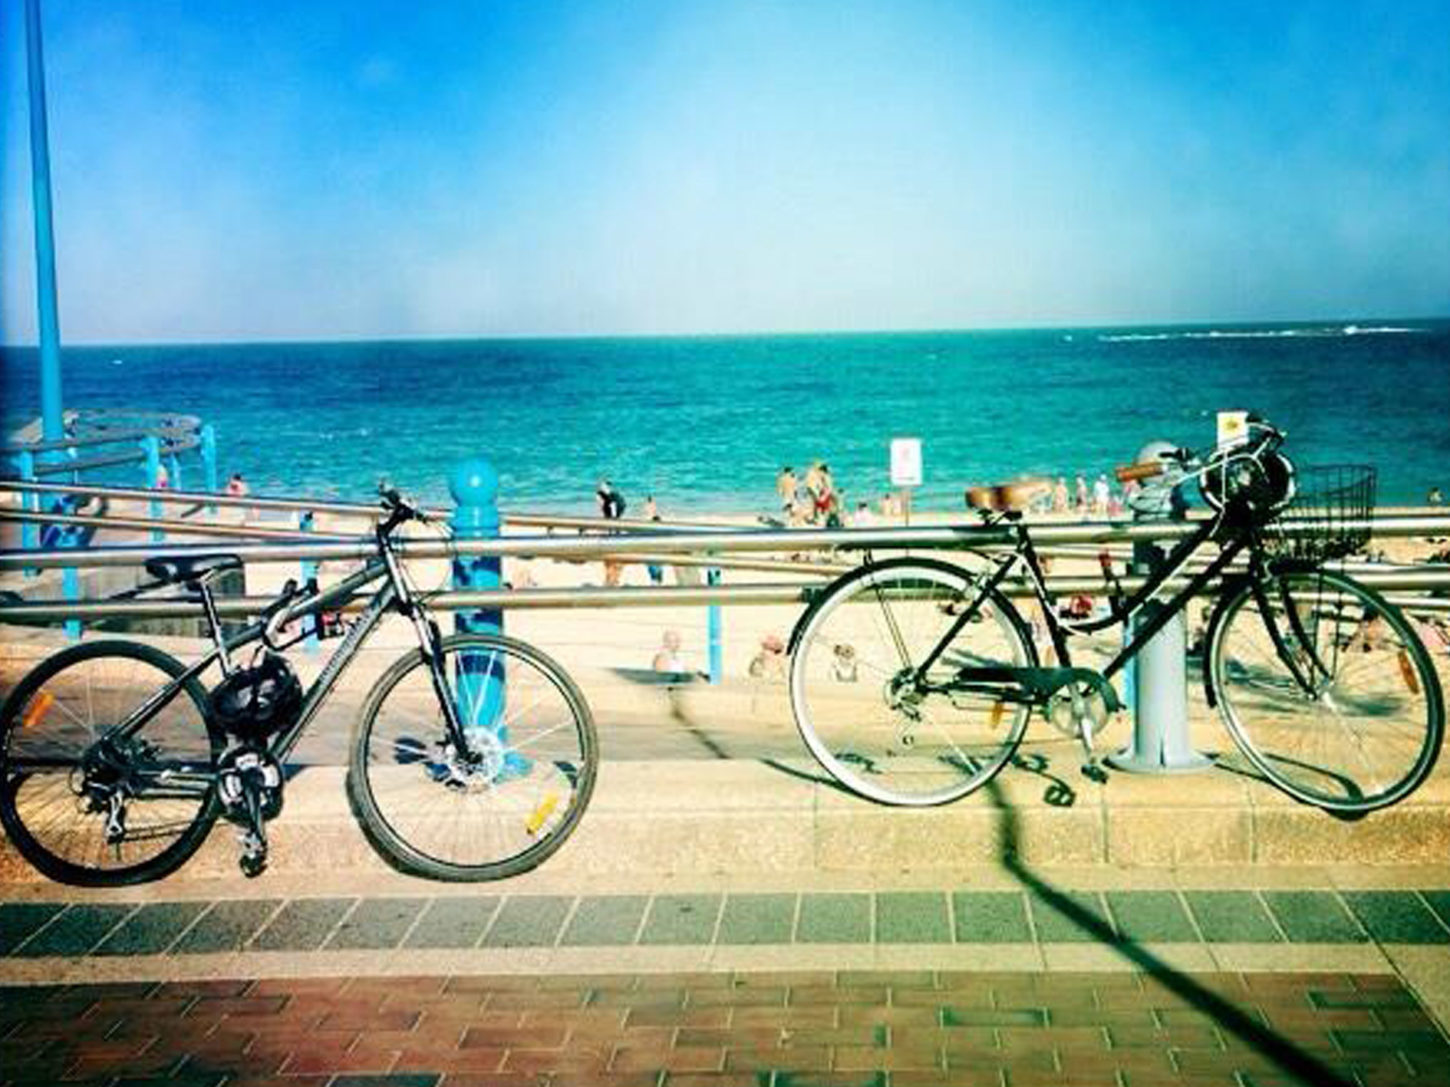 The ride from Surry Hills to Coogee